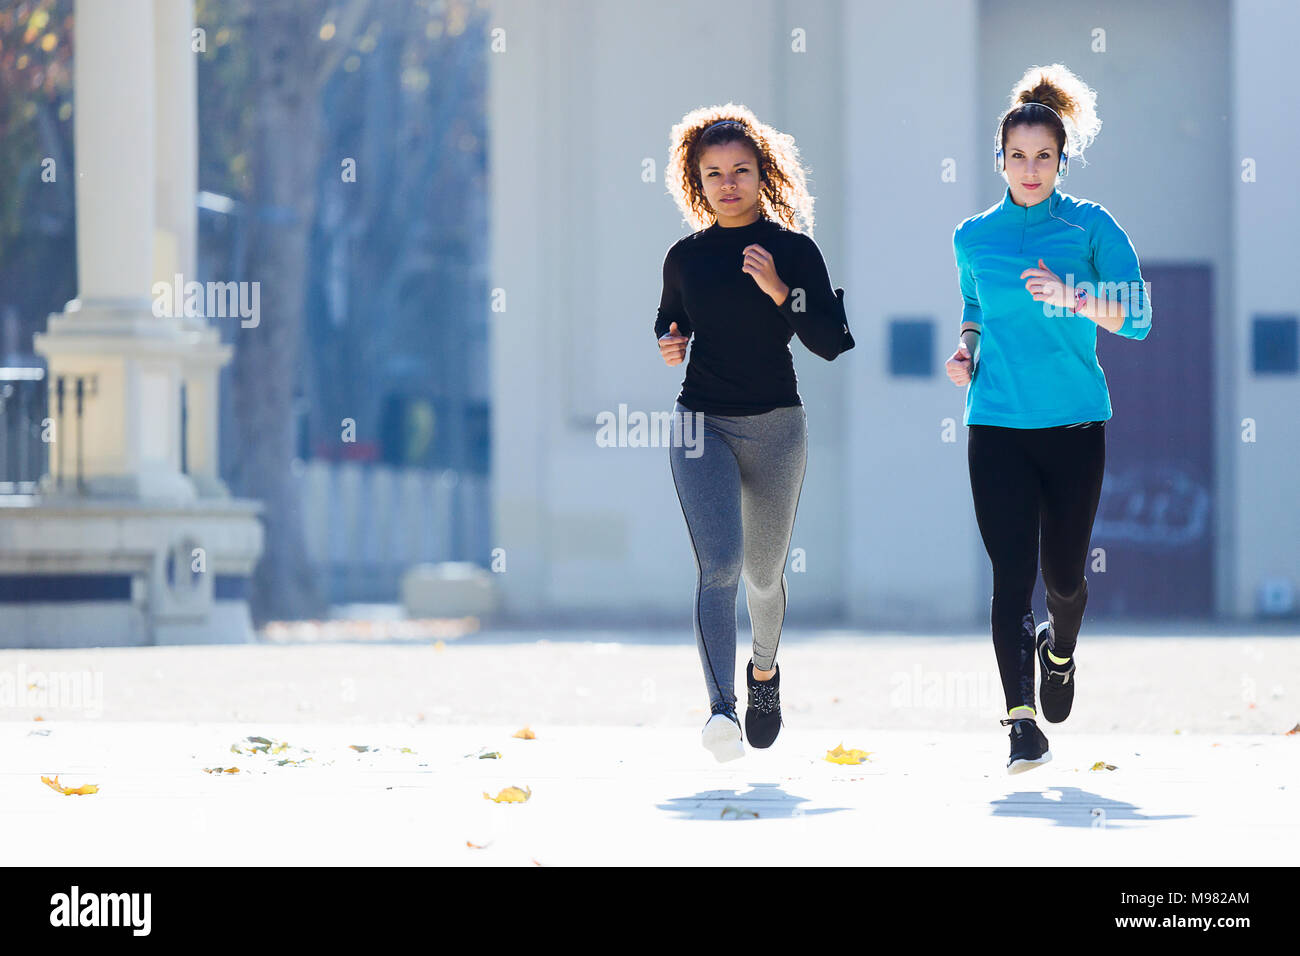 Two focused young women running listening to music Stock Photo